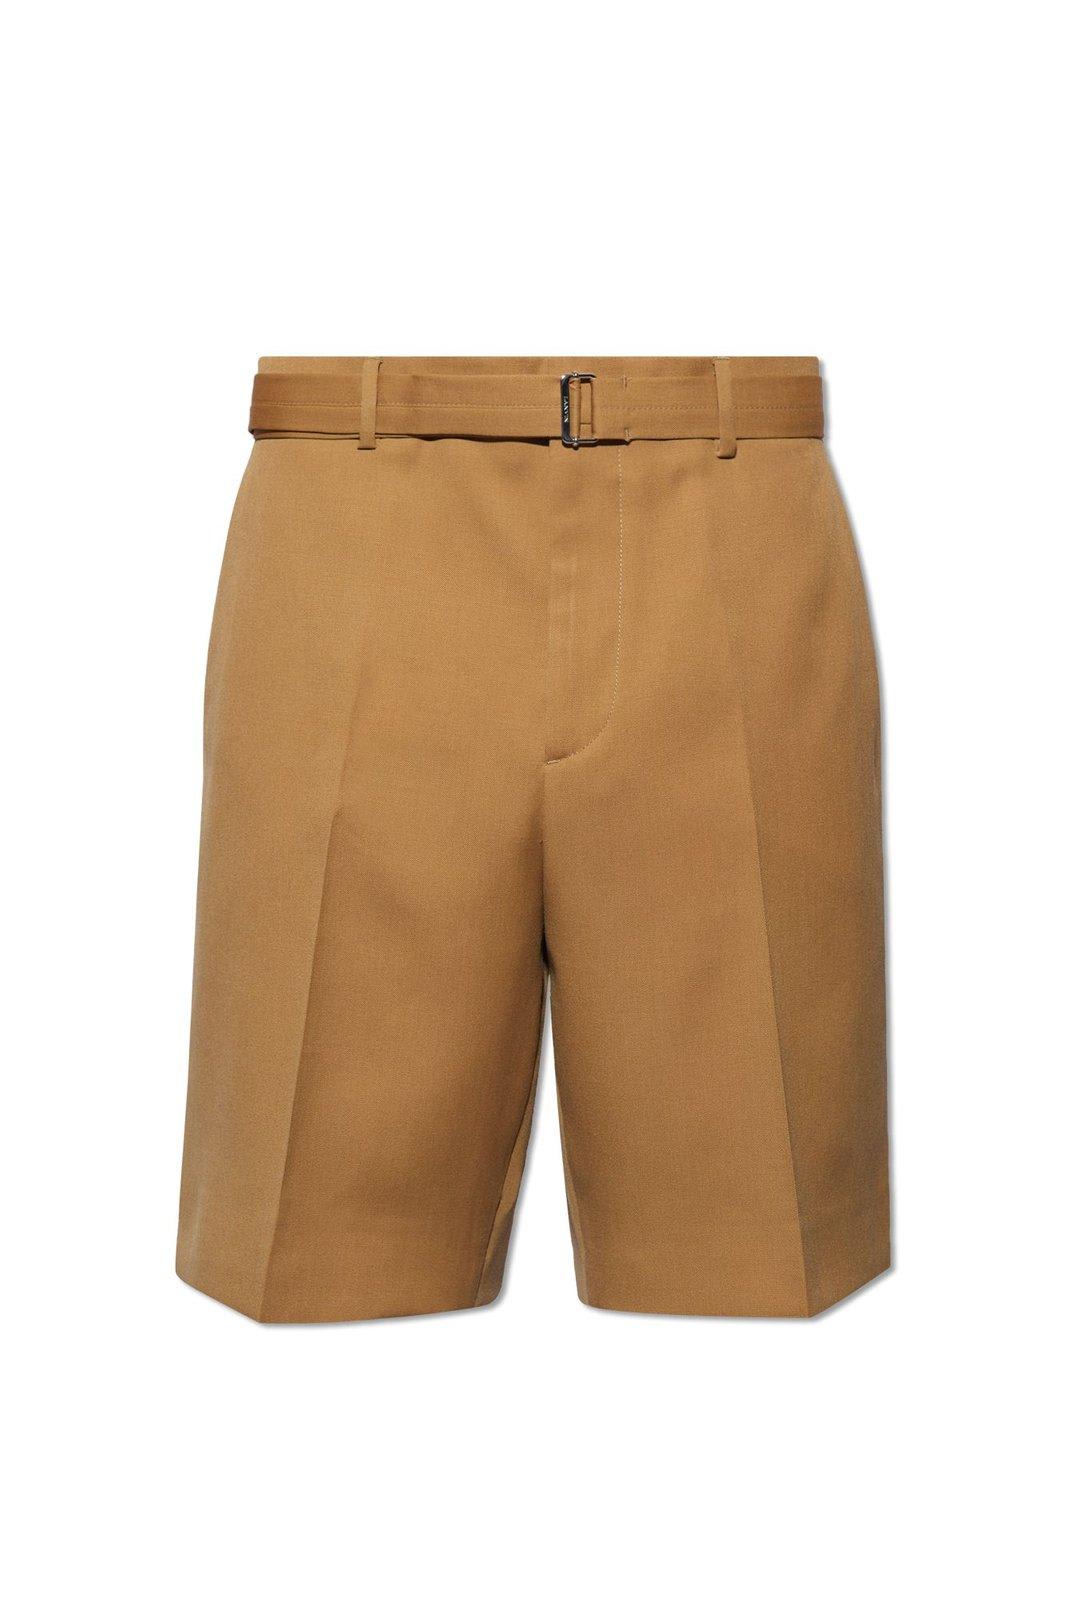 Pressed Crease Belted Shorts